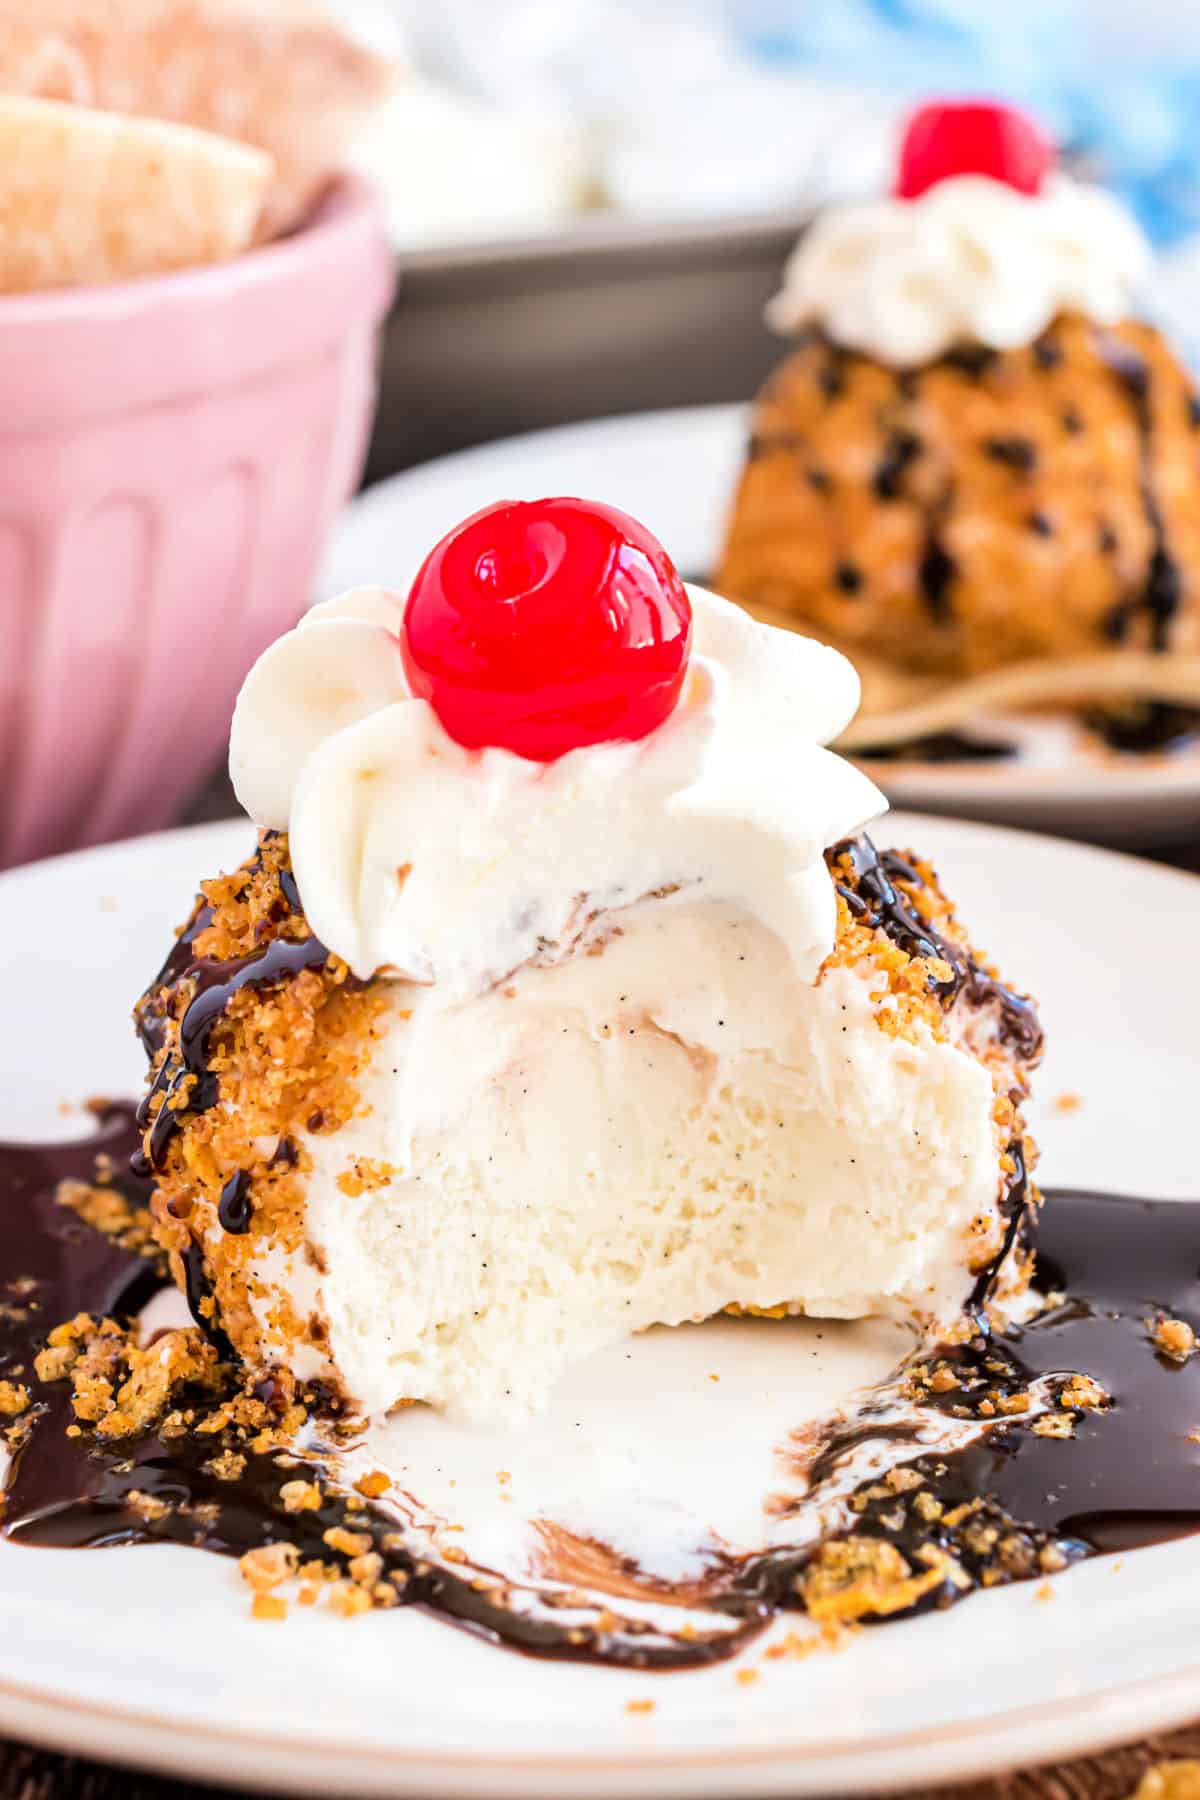 Homemade fried ice cream with a bite taken out.